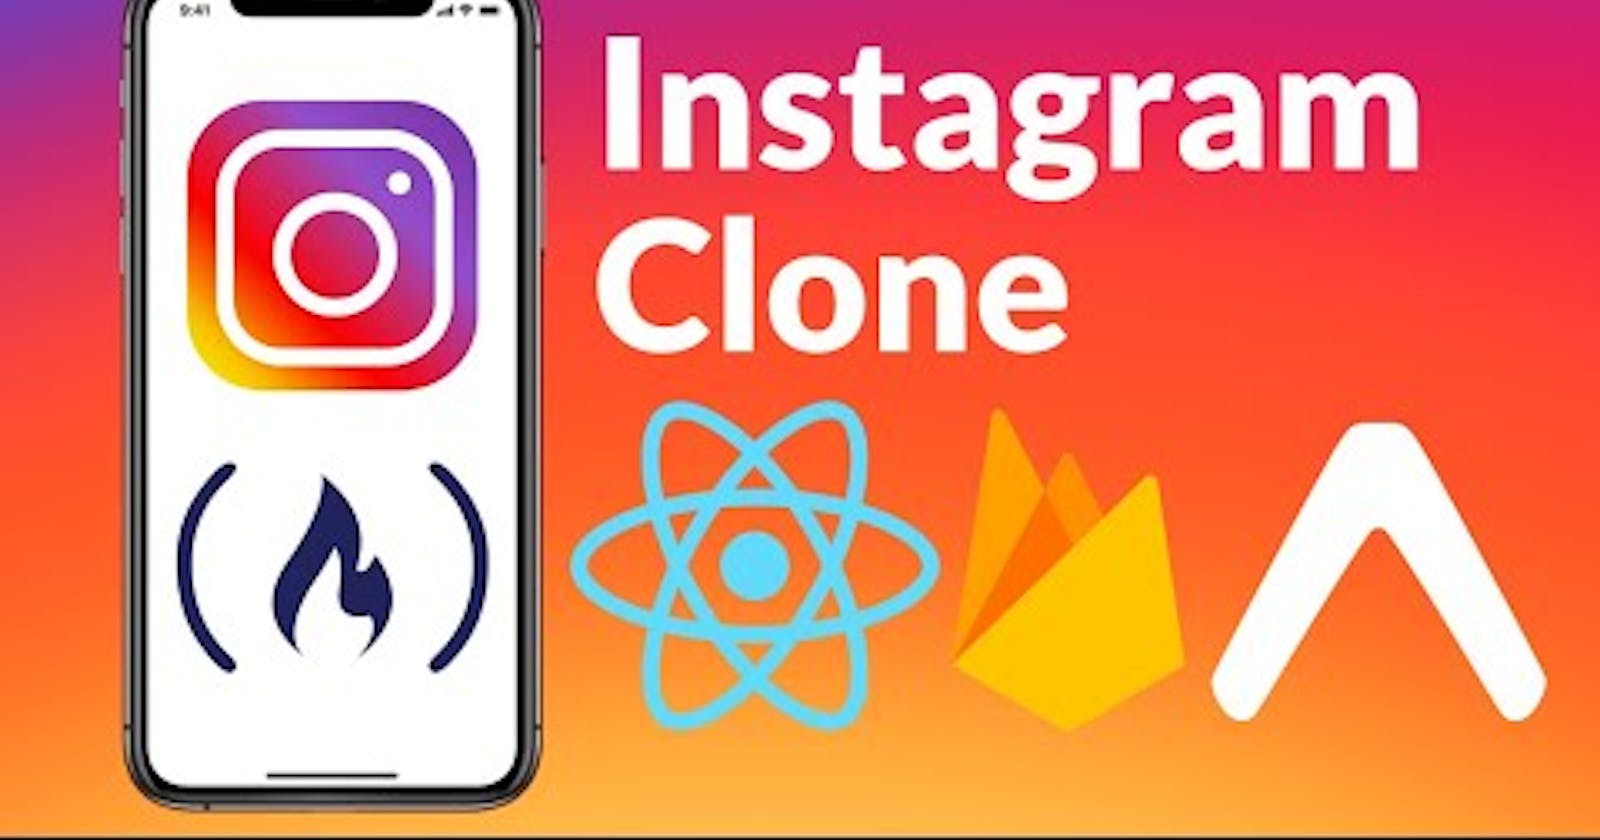 How to Make an Instagram Clone using React?